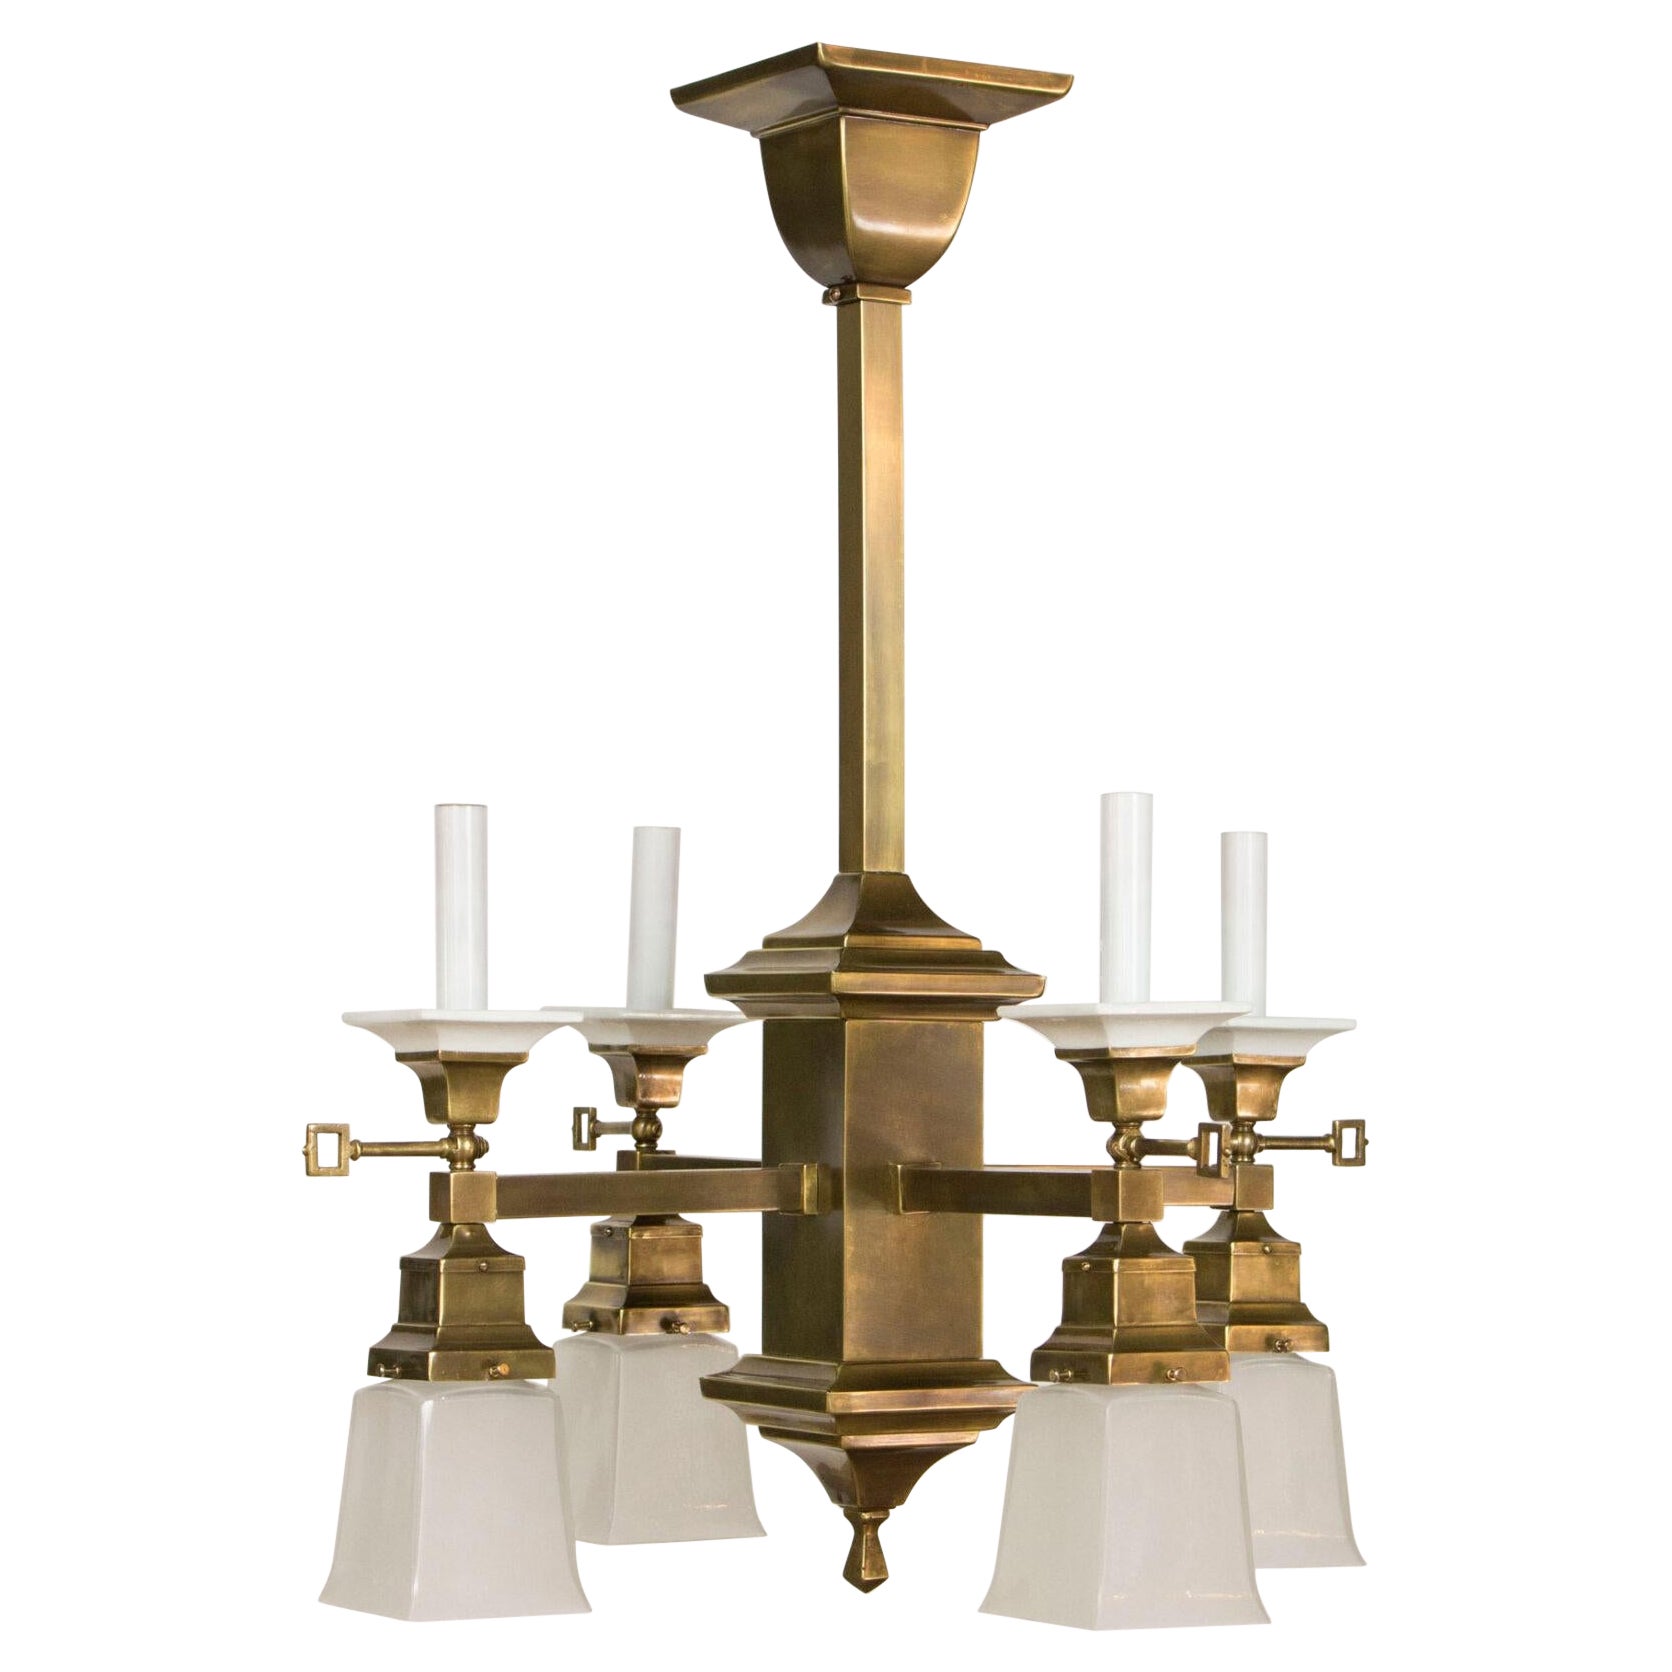 Four and Four Gas and Electric Fixture